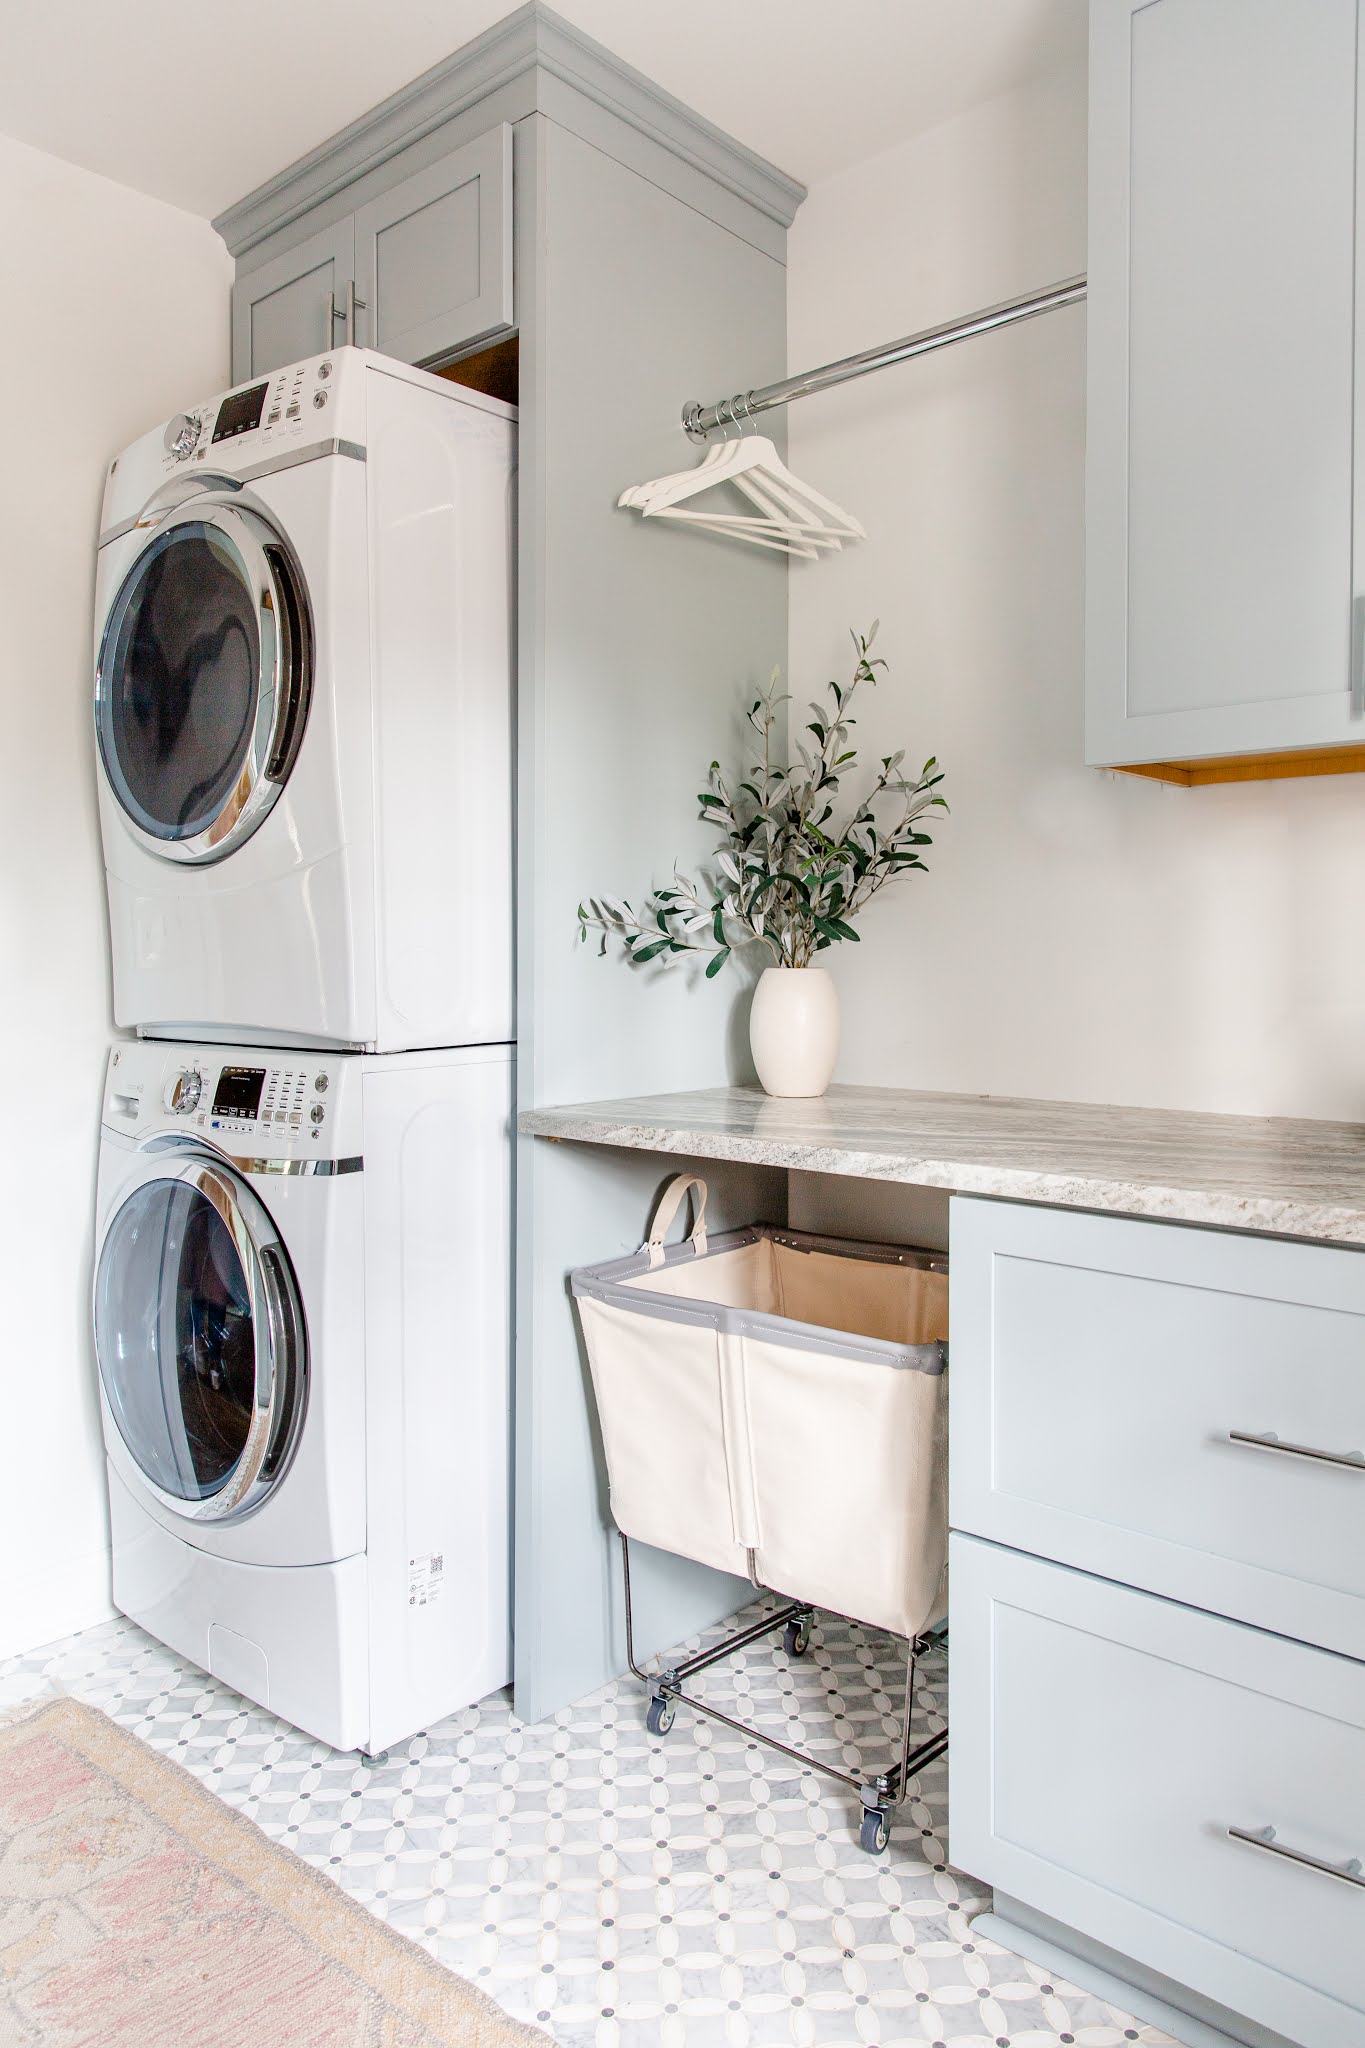 https://www.oliveandtate.com/2020/08/design-plan-laundry-utility-room-with.html